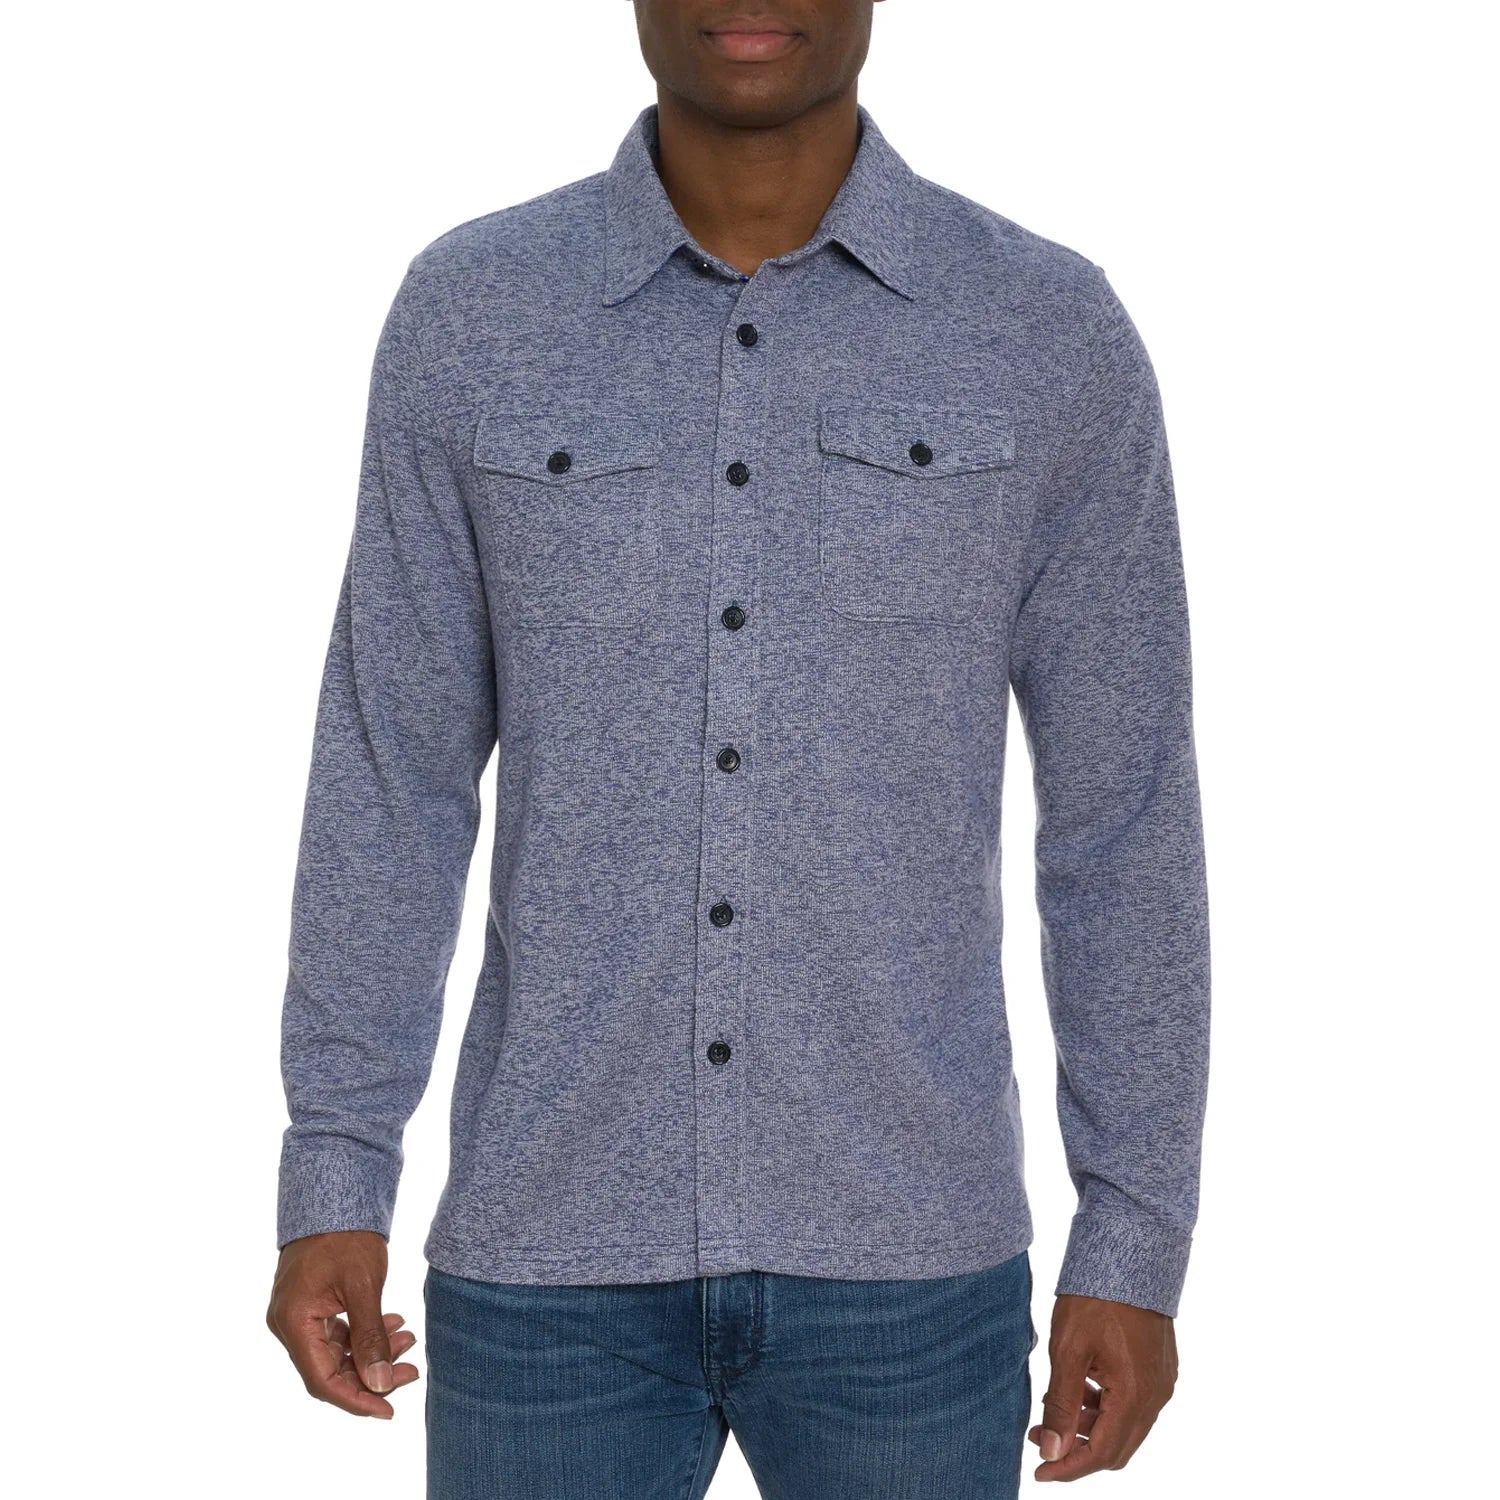 'Robert Graham Ortis Button Up L/S Sweater' in 'Navy' colour